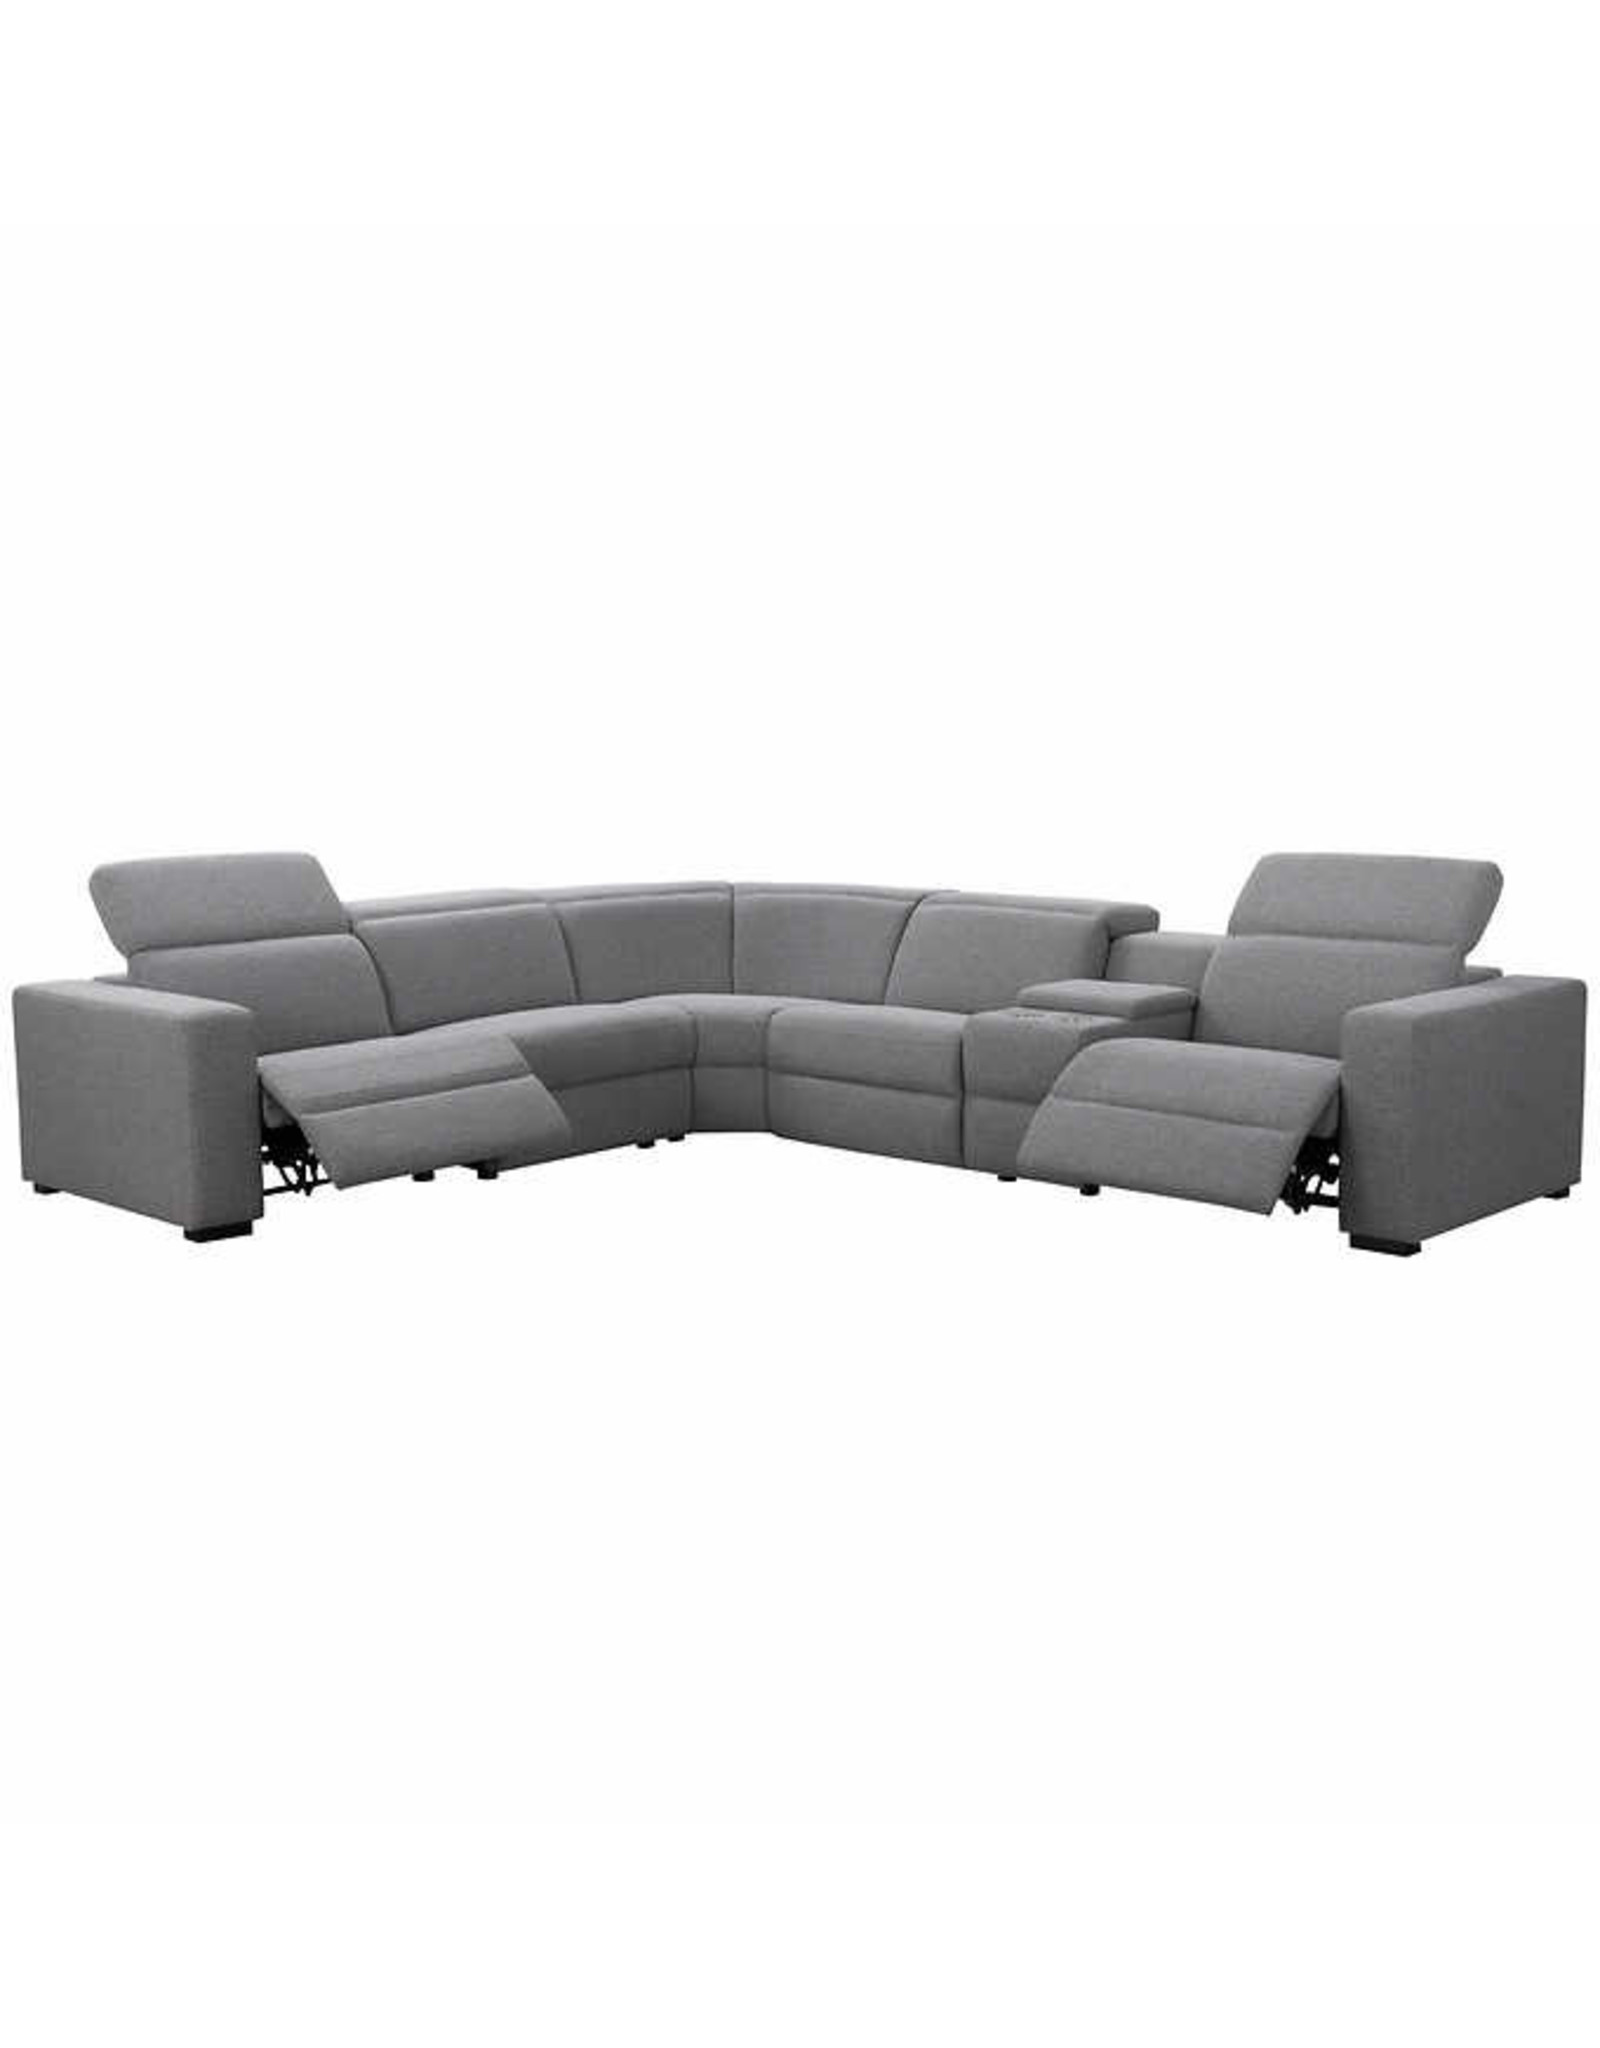 Woodston Woodston Fabric Power Reclining Sectional with Power Headrests